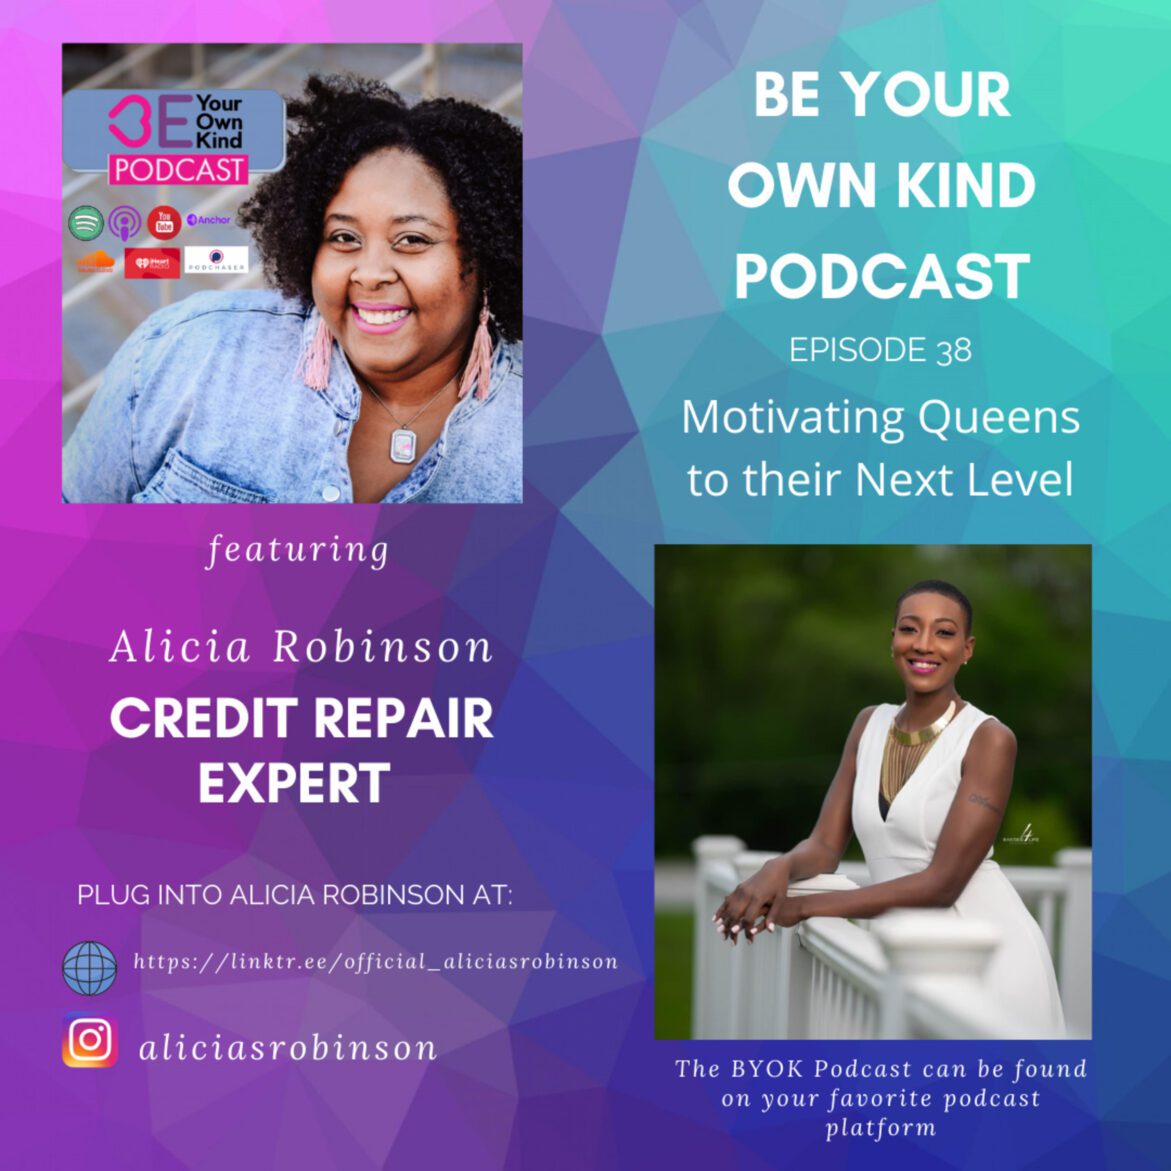 Black Podcasting - EP 38: BYOK w/ Alicia Robinson: Motivating Queens to their Next Level